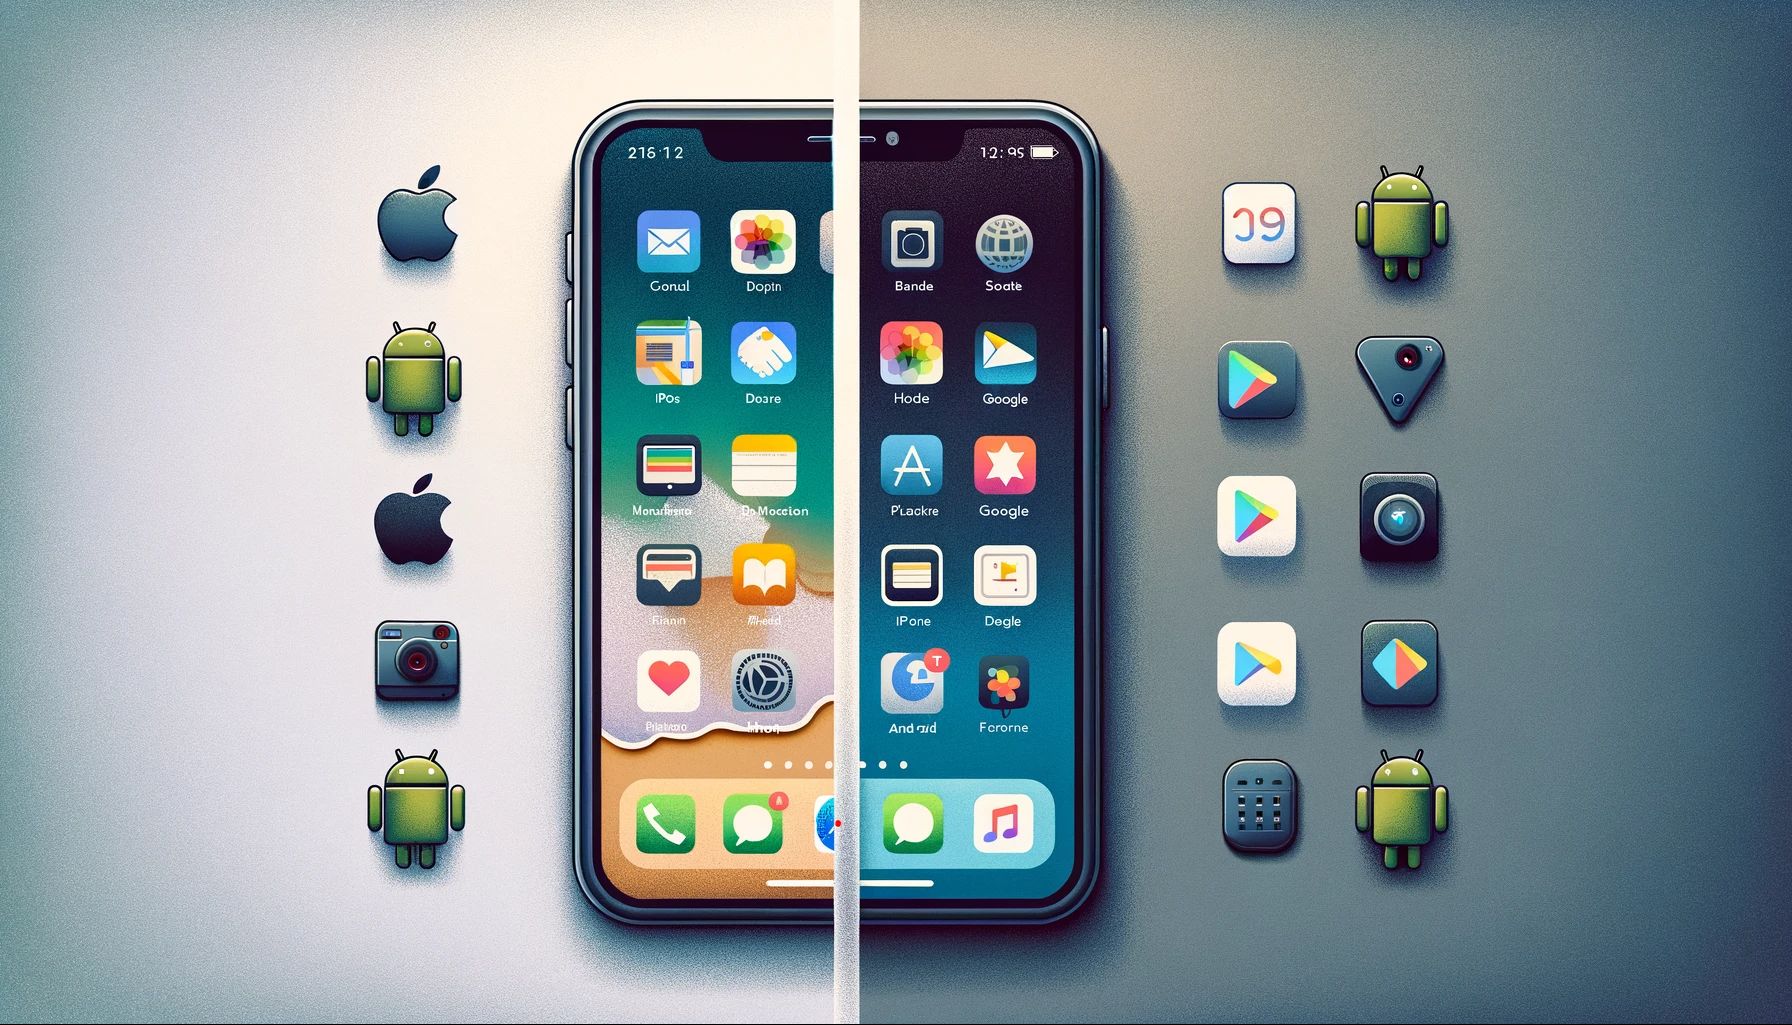 iPhone and Android